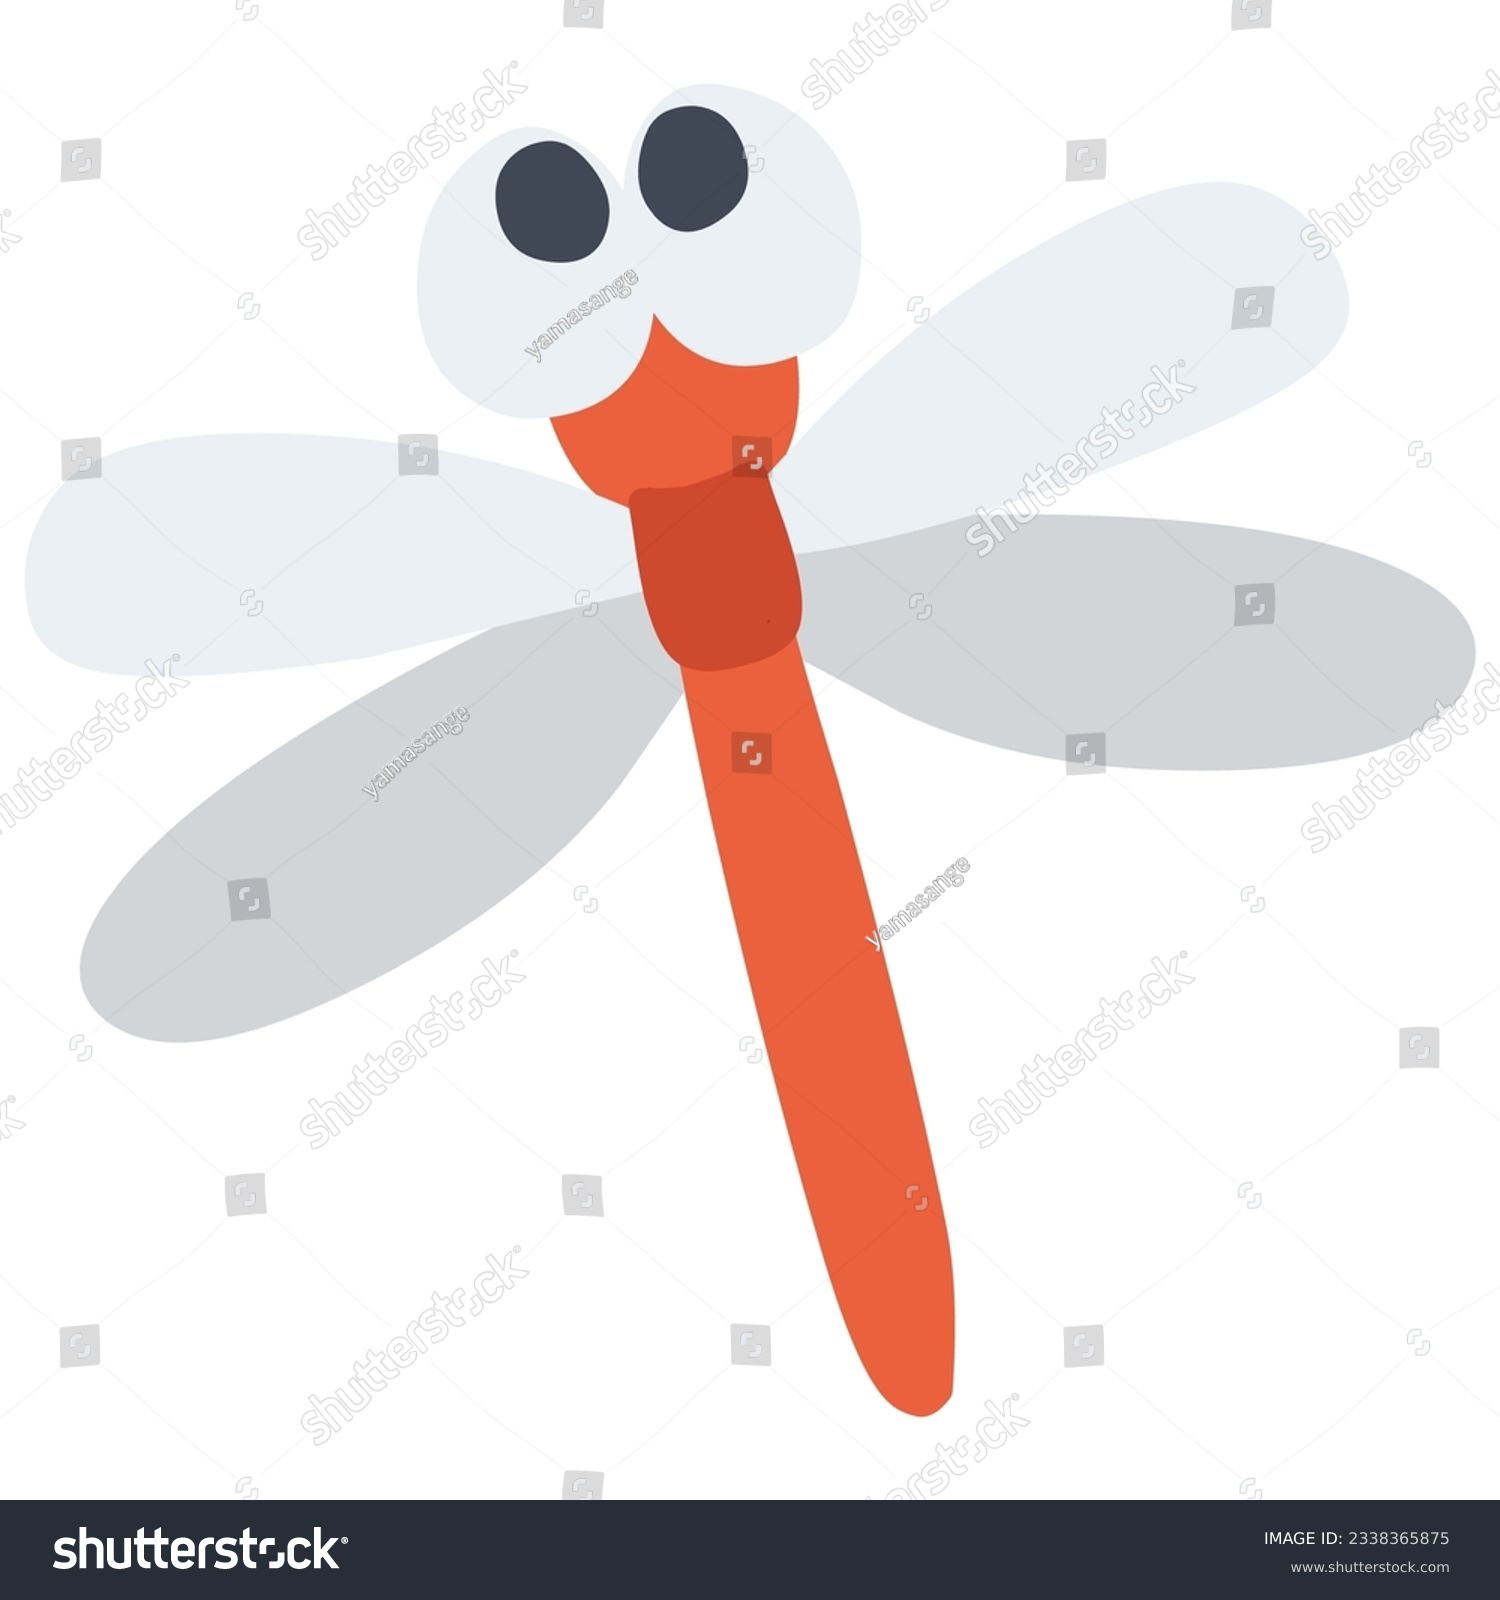 Clip art of red dragonfly deformed like a character #2338365875